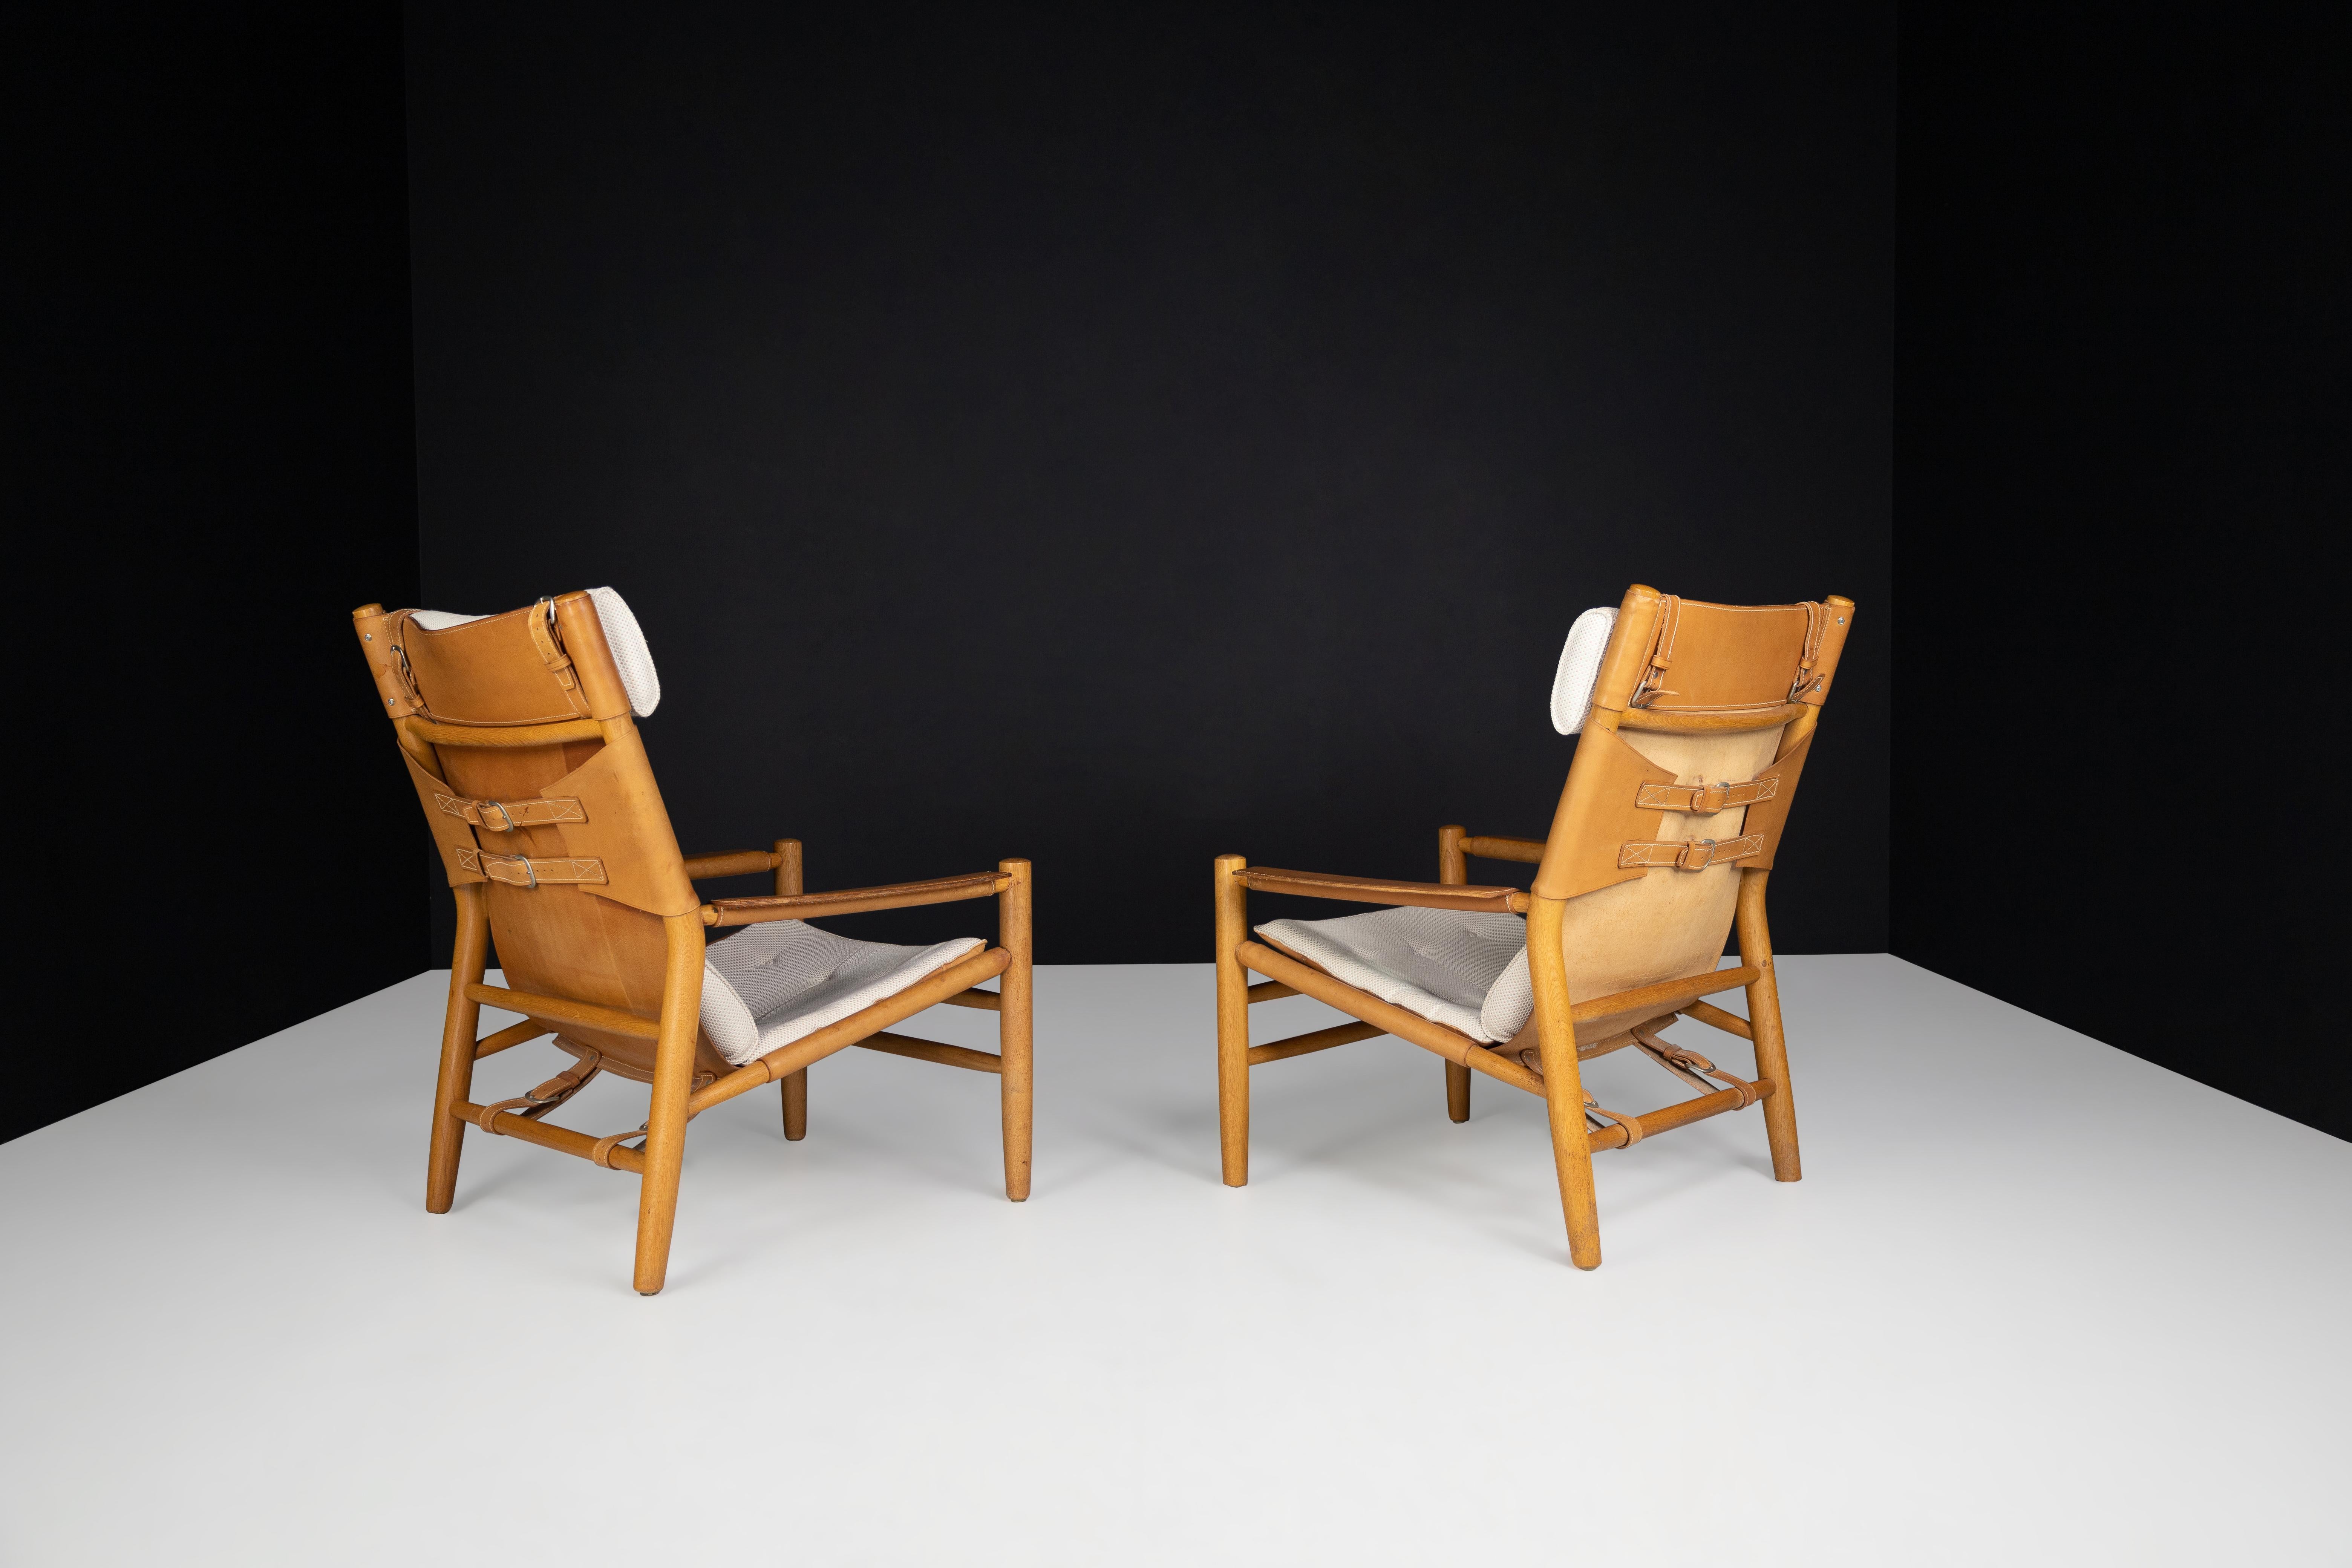 20th Century Kenneth Bergenblad for DUX 'Dormi' Leather and Oak Lounge Chairs, Sweden 1970s  